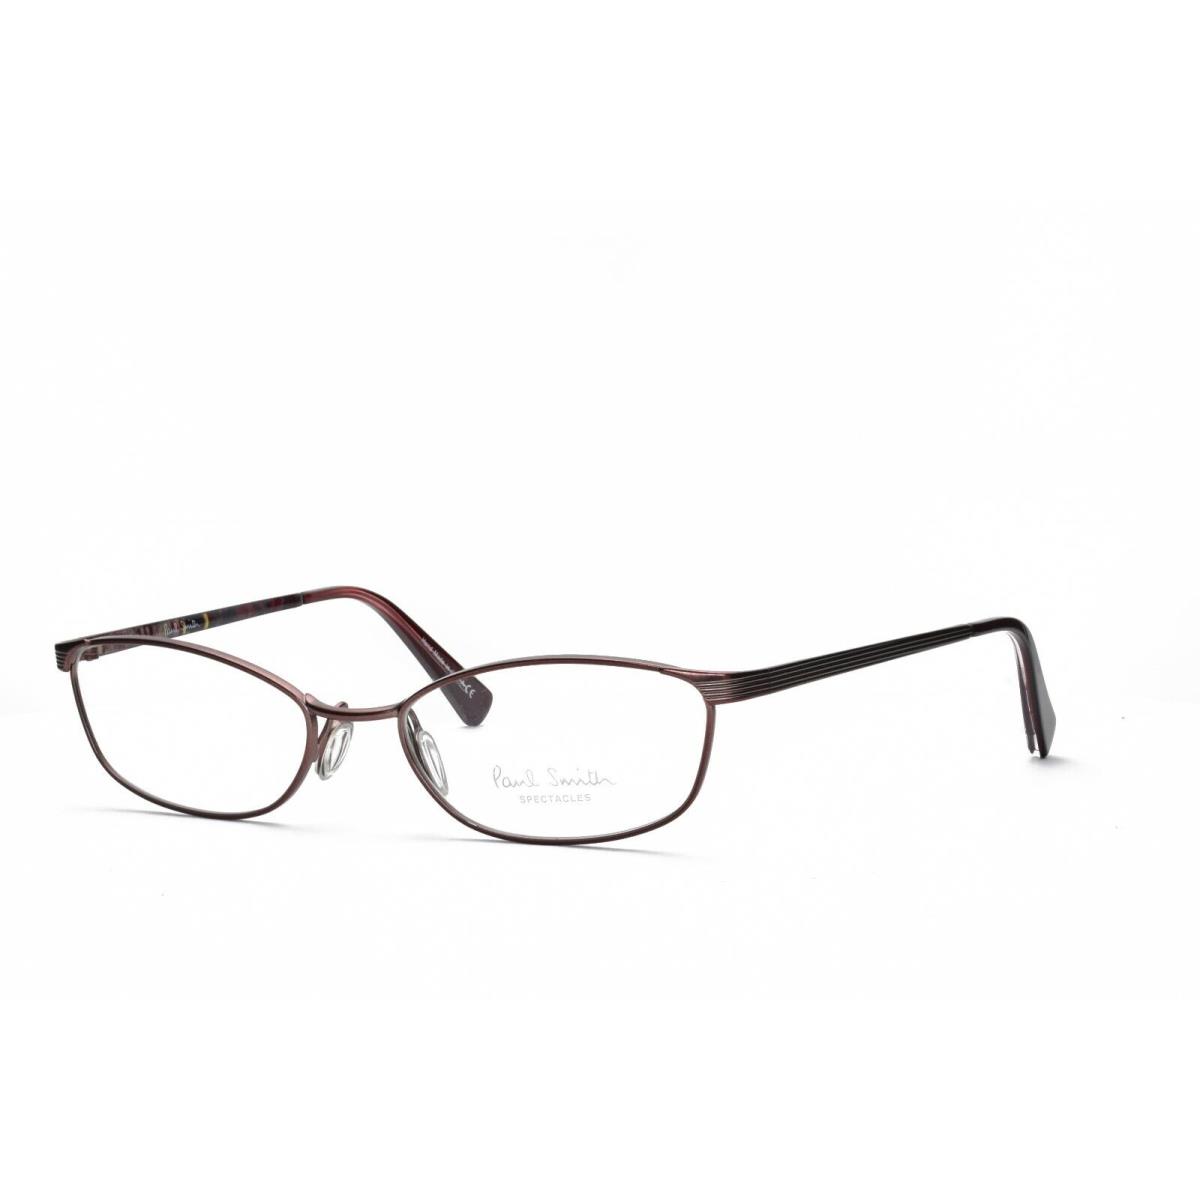 Paul Smith PS Lora 4046 5084 Eyeglasses Frames Only 51-17-140